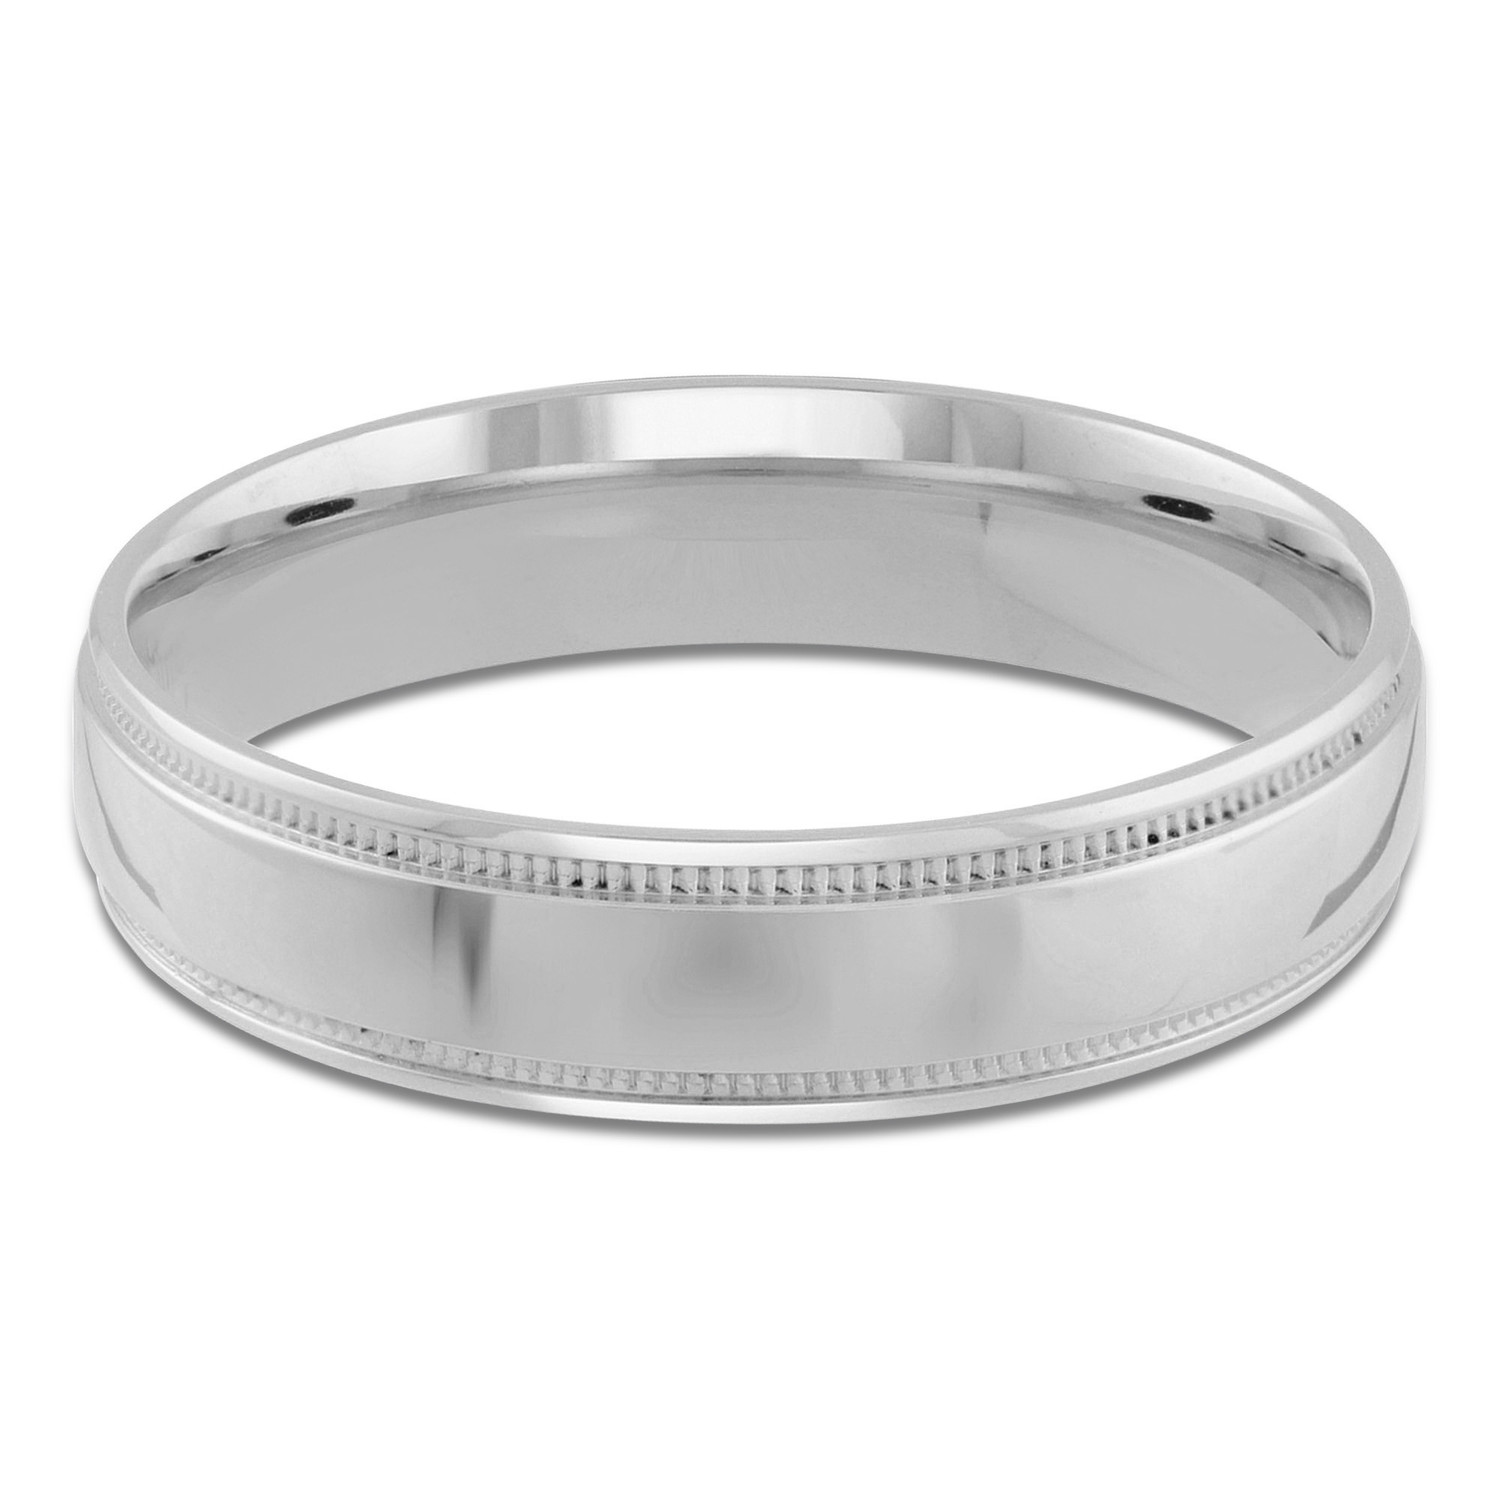 5 MM Milgrained Comfort Fit Classic Mens Wedding Band in White Gold (MDVBC0006-5MM-W)